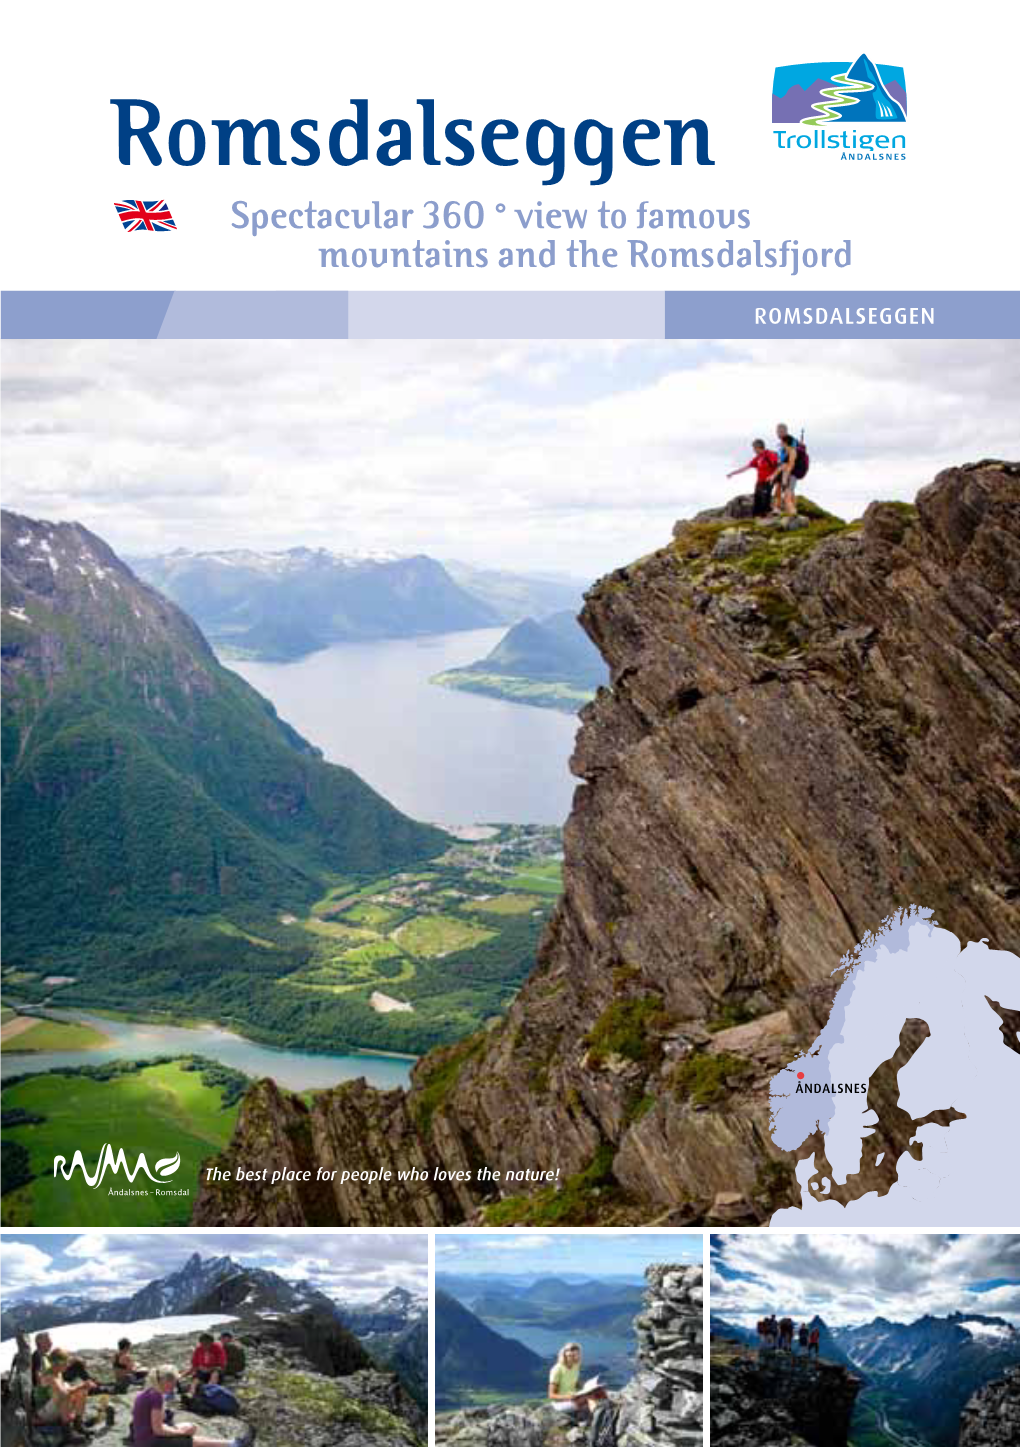 Romsdalseggen Spectacular 360 ° View to Famous Mountains and the Romsdalsfjord